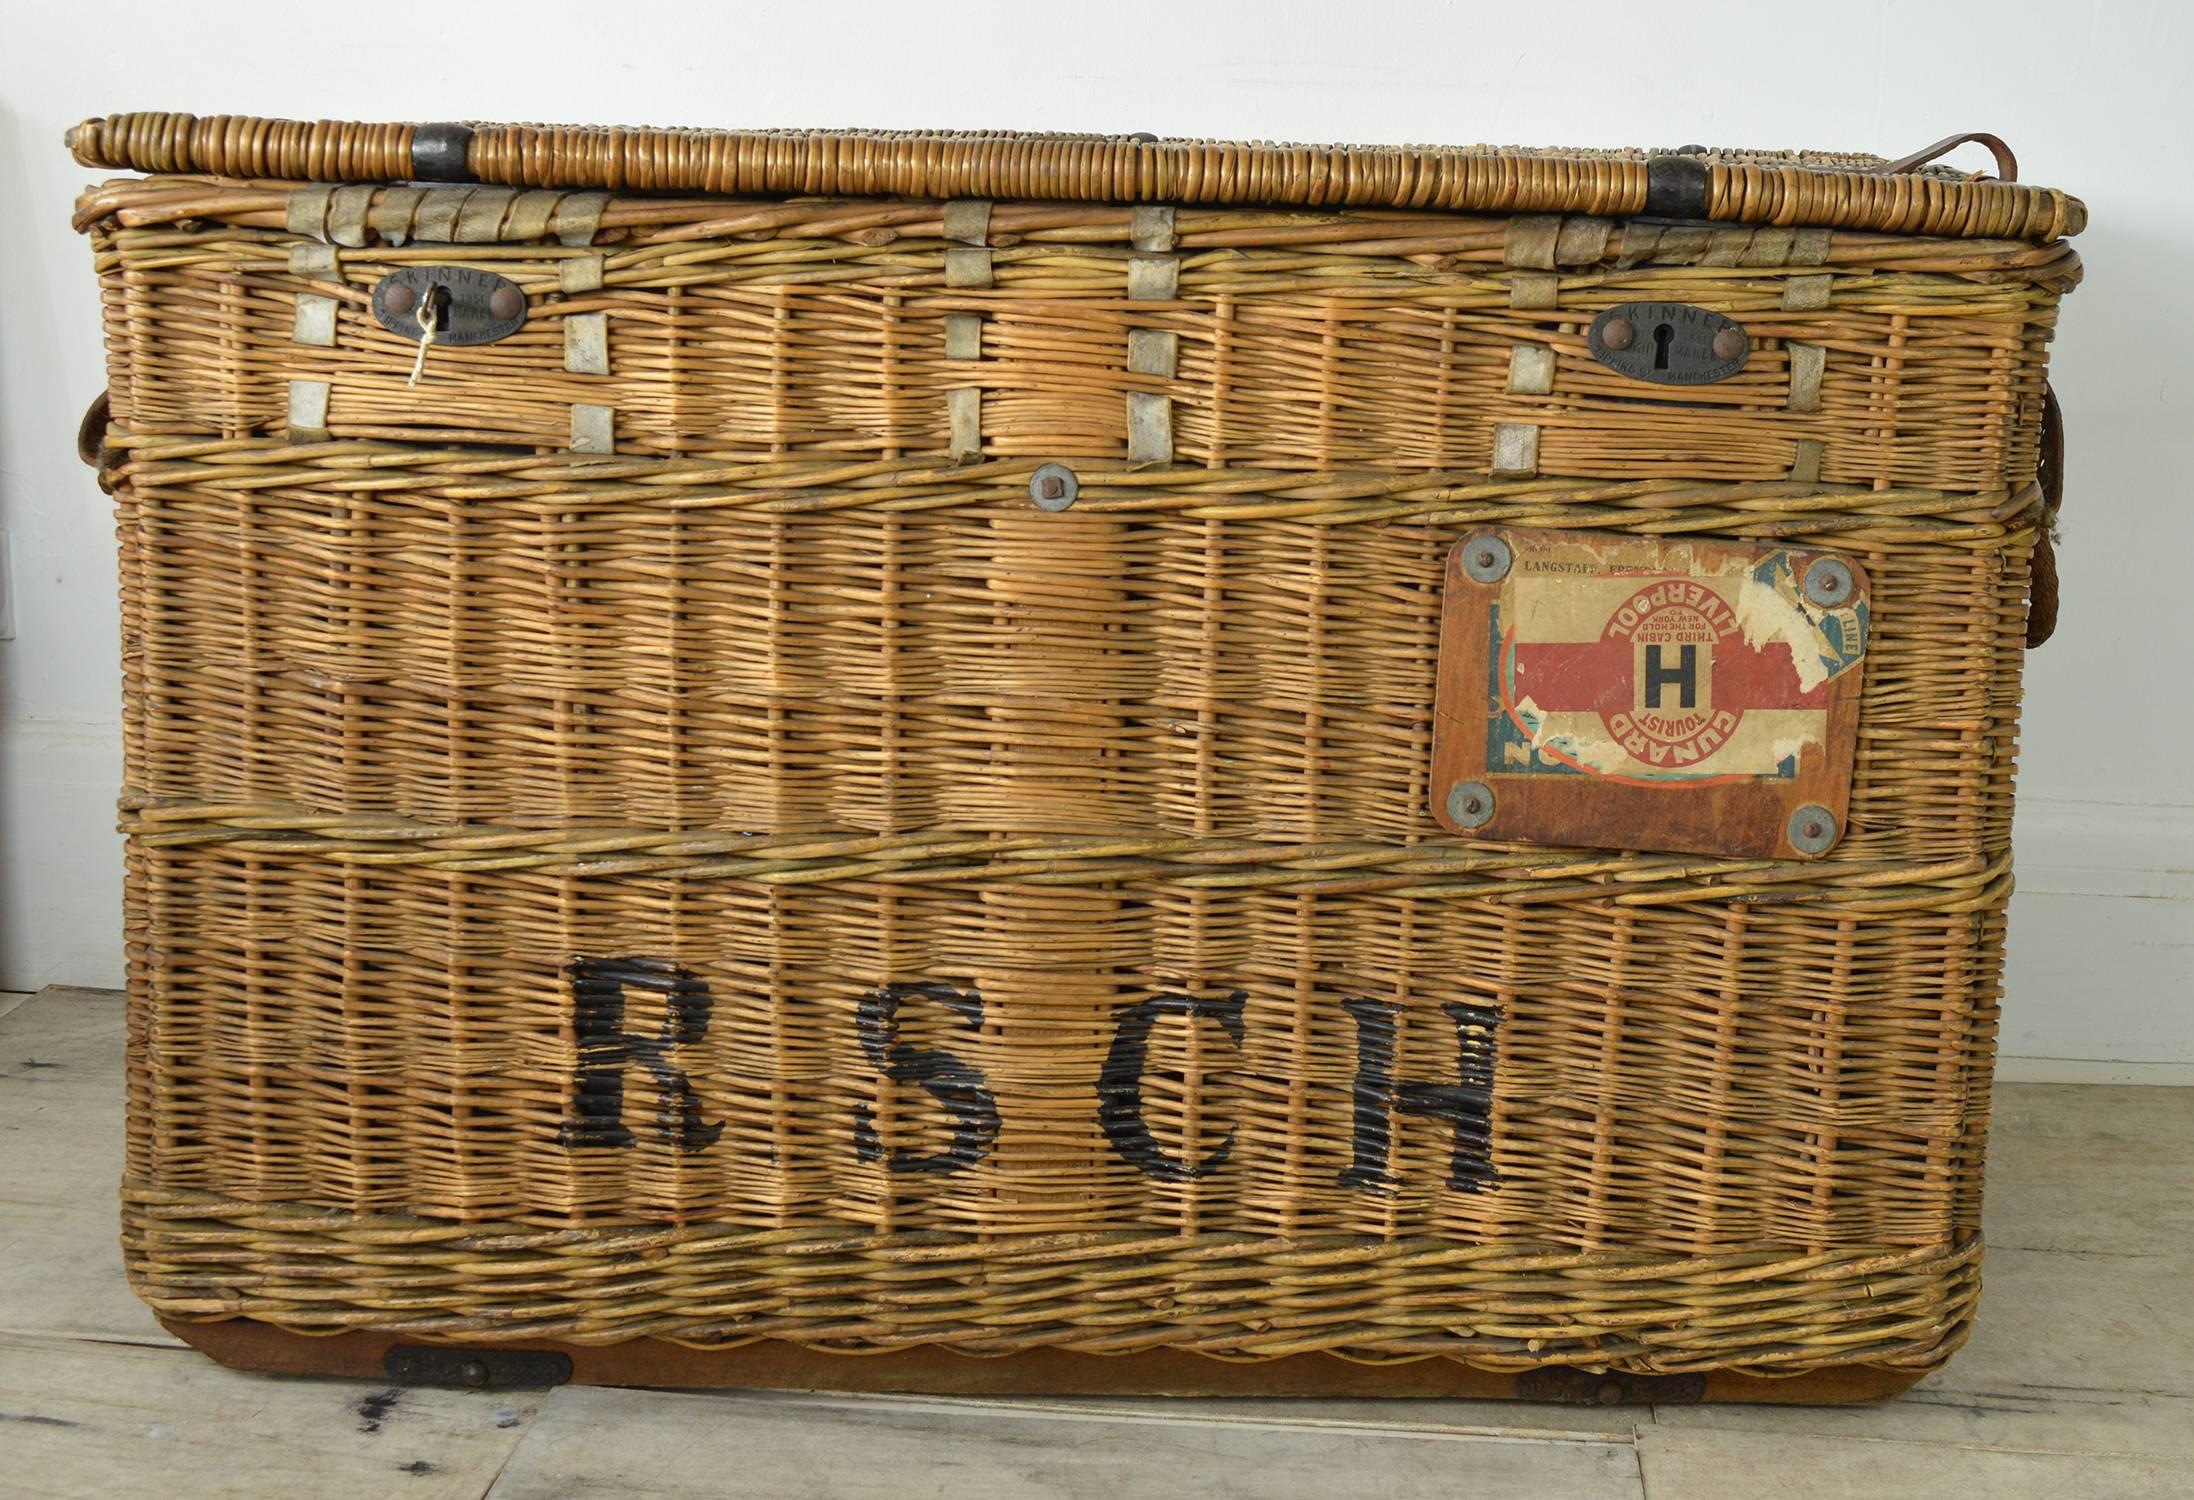 A fabulous wicker trunk of sufficient size as to make a piece of furniture console or buffet.

Wonderful color.

Great character and history. Exemplified by the Cunard label on it.

Lockable with the original key. Original canvas